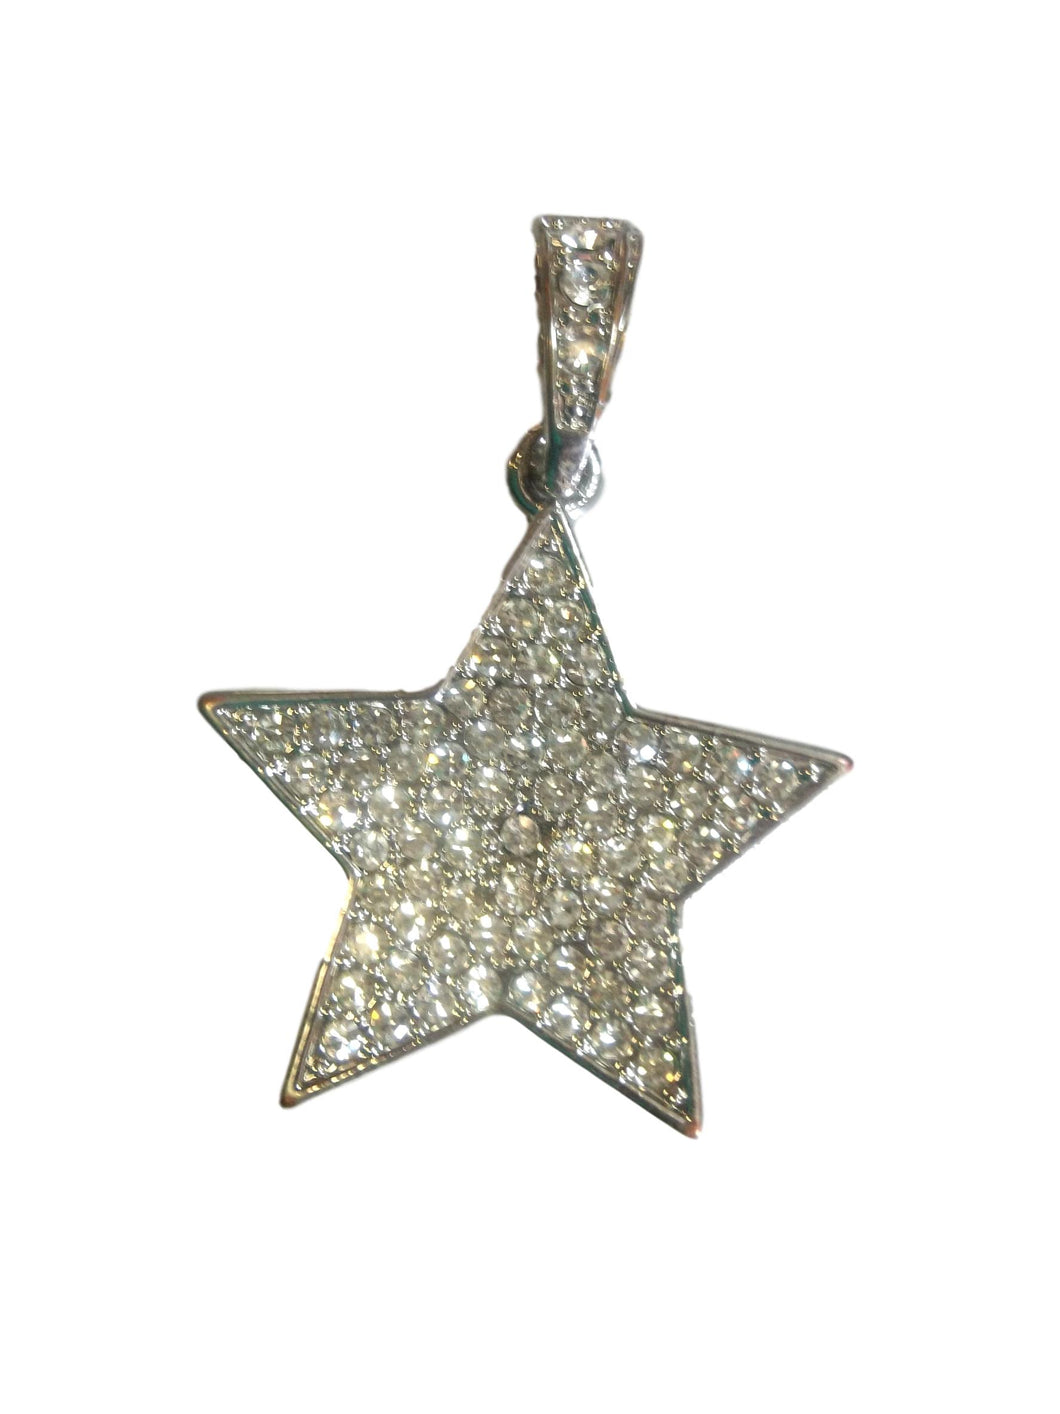 Sparkly star shaped pendent with rhinestones